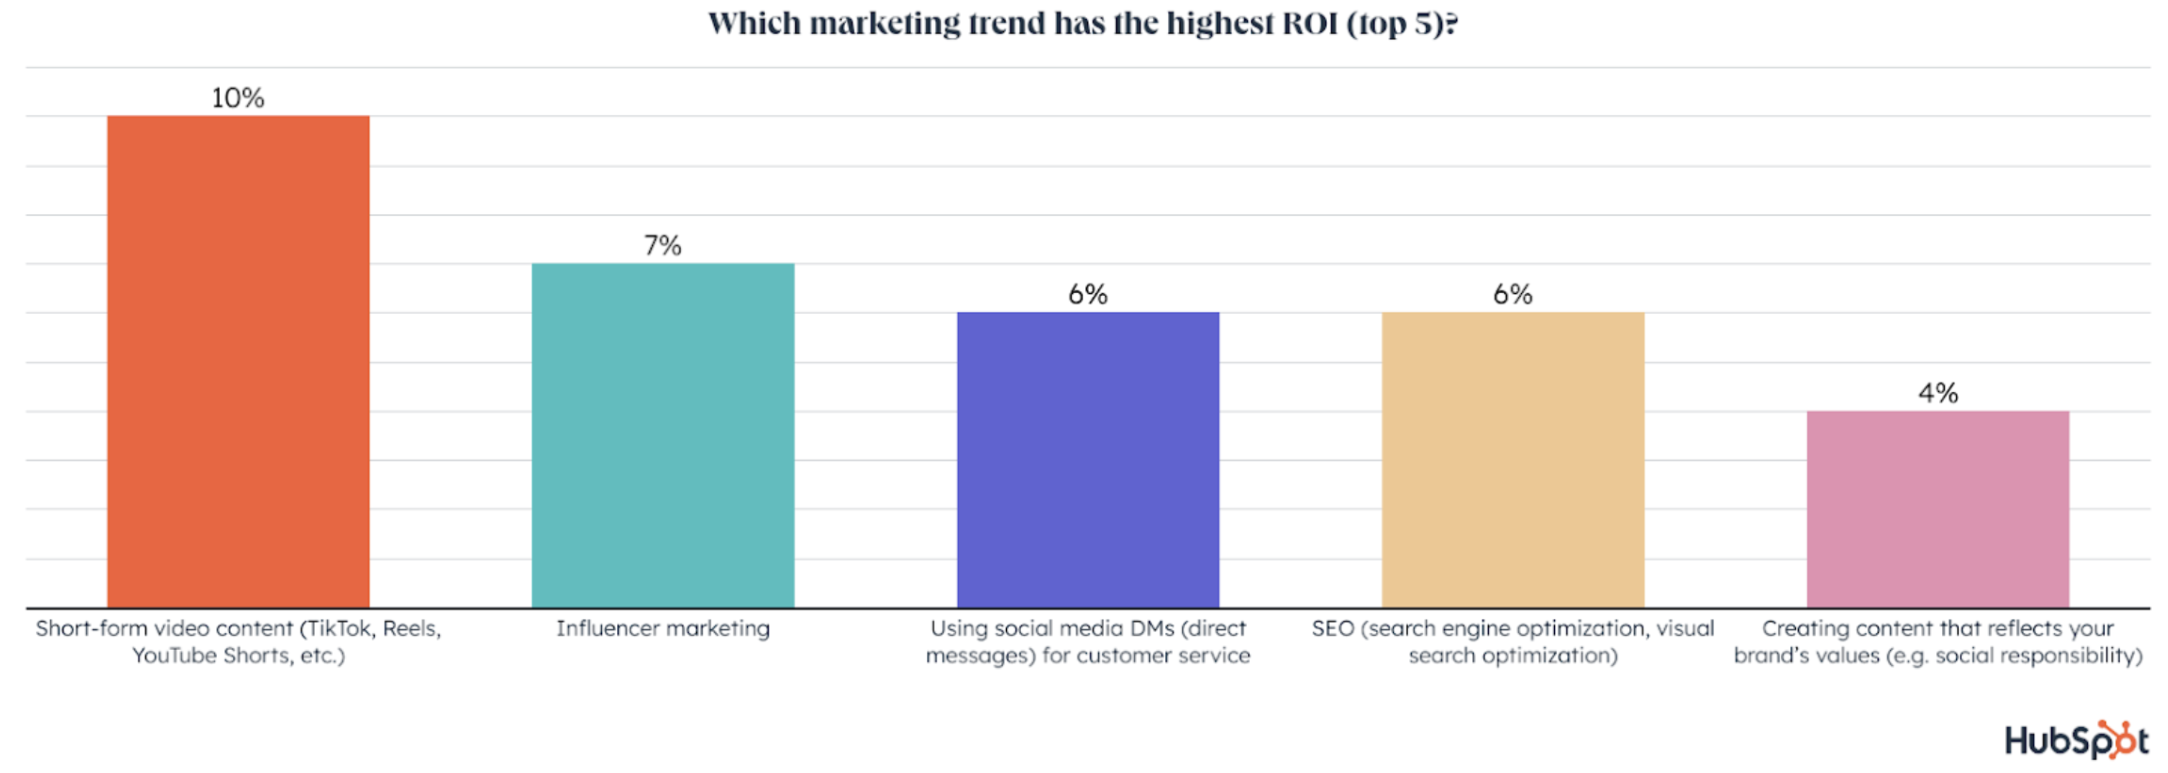 Graph showing which marketing trends have the highest ROI with short-form video content at number one.